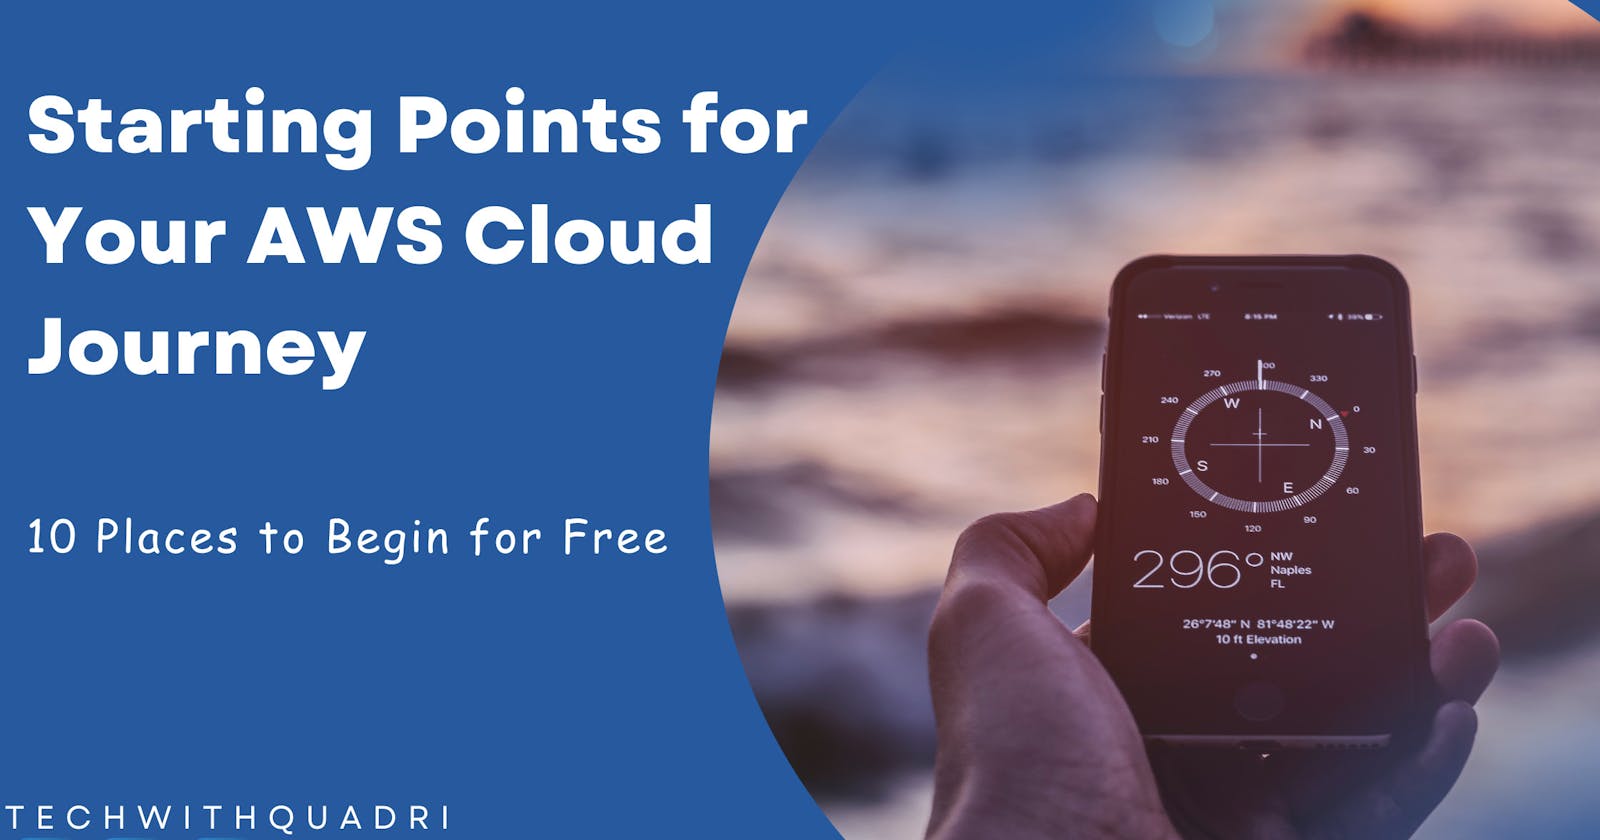 Starting Points for Your AWS Cloud Journey: 10 Places to Begin (Free)